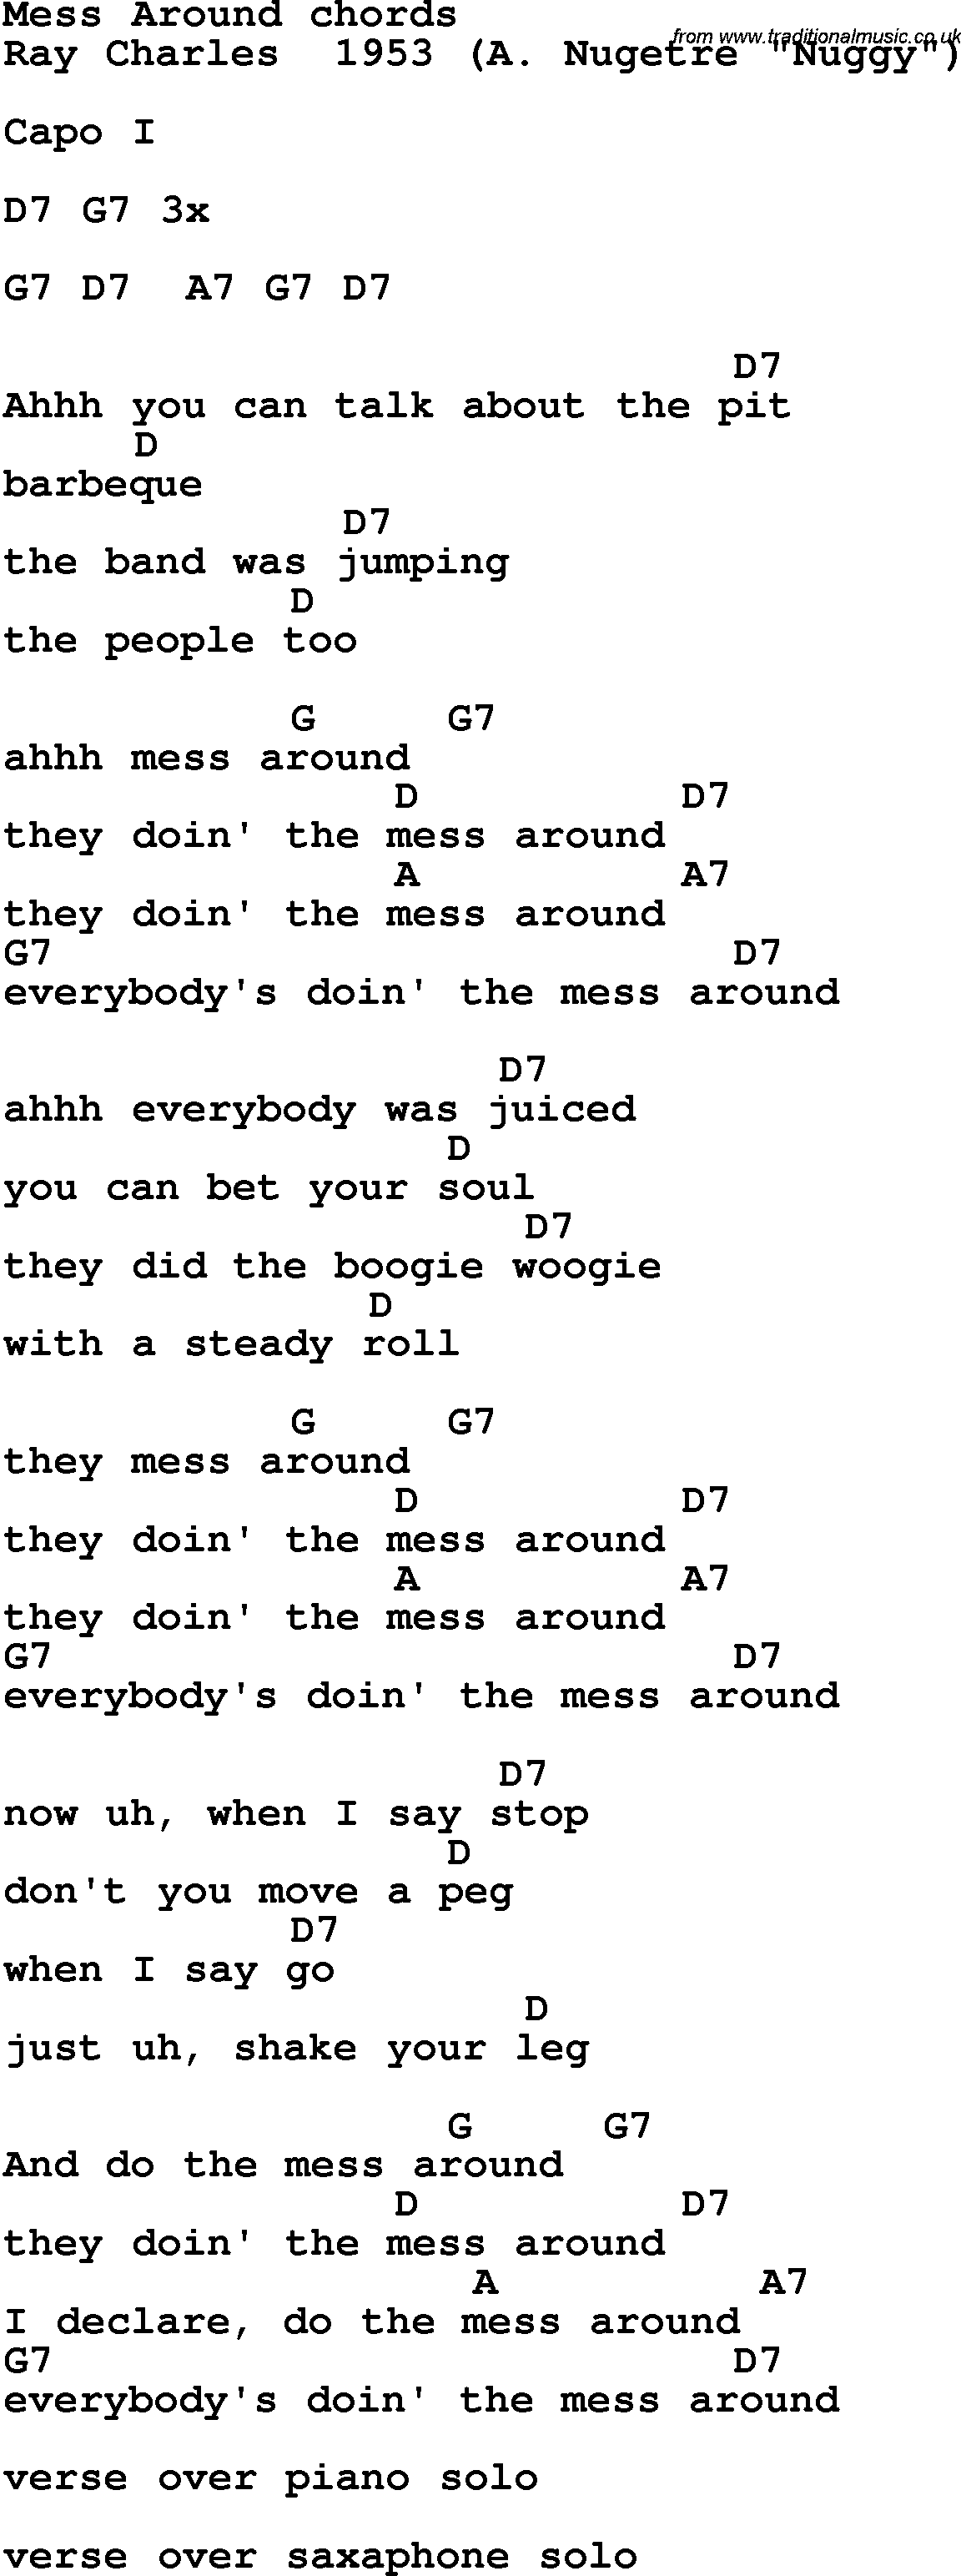 Song Lyrics with guitar chords for Mess Around